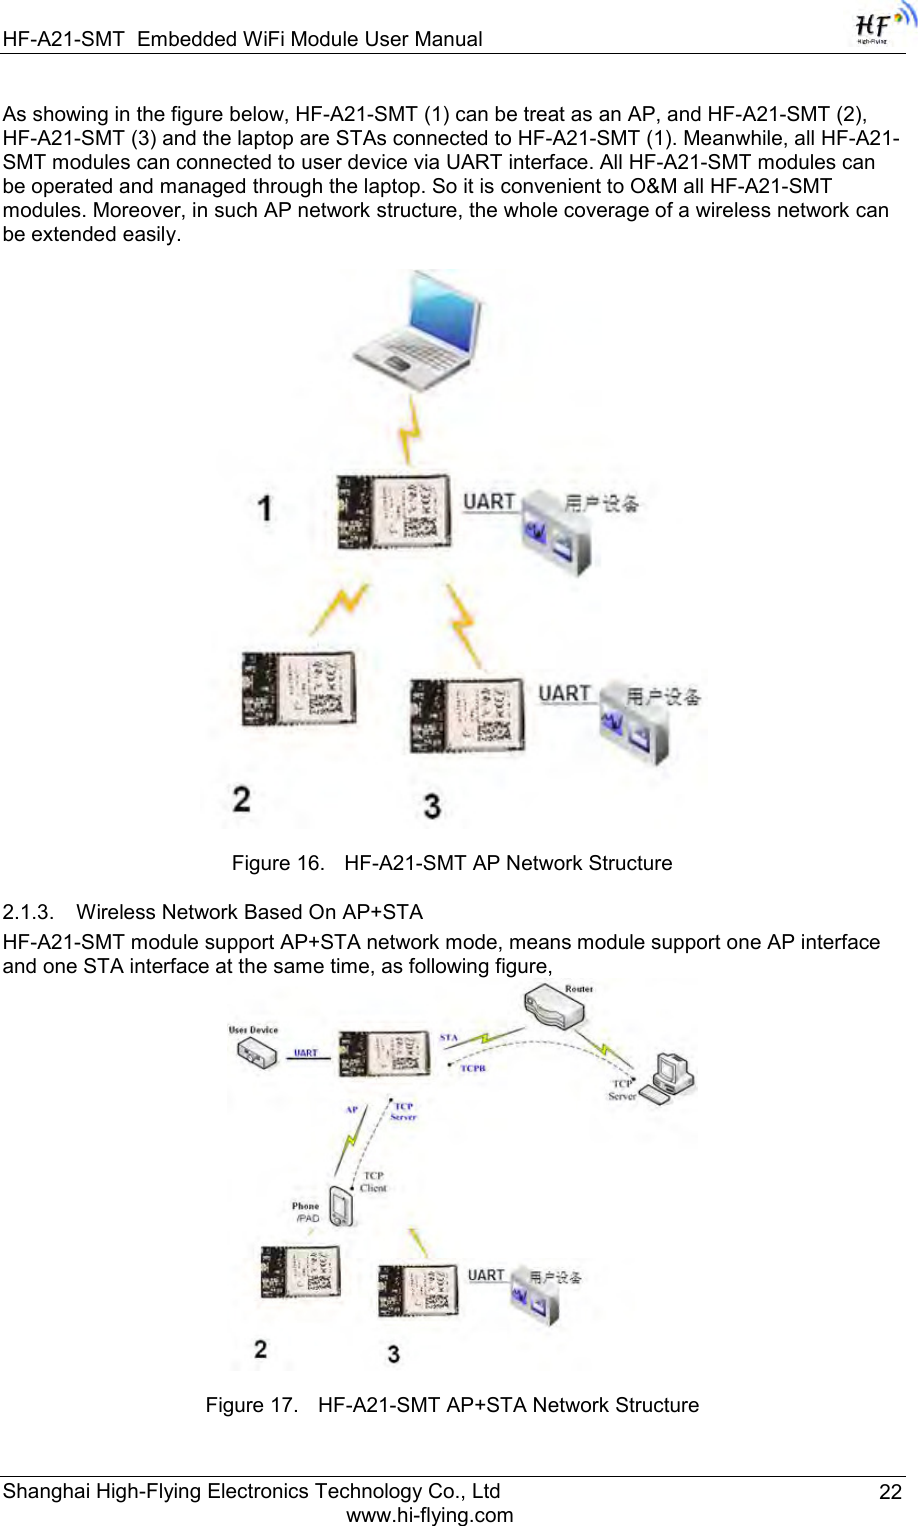 HF-A21-SMT Embedded WiFi Module User Manual Shanghai High-Flying Electronics Technology Co., Ltd www.hi-flying.com 22 As showing in the figure below, HF-A21-SMT (1) can be treat as an AP, and HF-A21-SMT (2), HF-A21-SMT (3) and the laptop are STAs connected to HF-A21-SMT (1). Meanwhile, all HF-A21-SMT modules can connected to user device via UART interface. All HF-A21-SMT modules can be operated and managed through the laptop. So it is convenient to O&amp;M all HF-A21-SMT modules. Moreover, in such AP network structure, the whole coverage of a wireless network can be extended easily.    Figure 16. HF-A21-SMT AP Network Structure 2.1.3. Wireless Network Based On AP+STA HF-A21-SMT module support AP+STA network mode, means module support one AP interface and one STA interface at the same time, as following figure,  Figure 17. HF-A21-SMT AP+STA Network Structure 